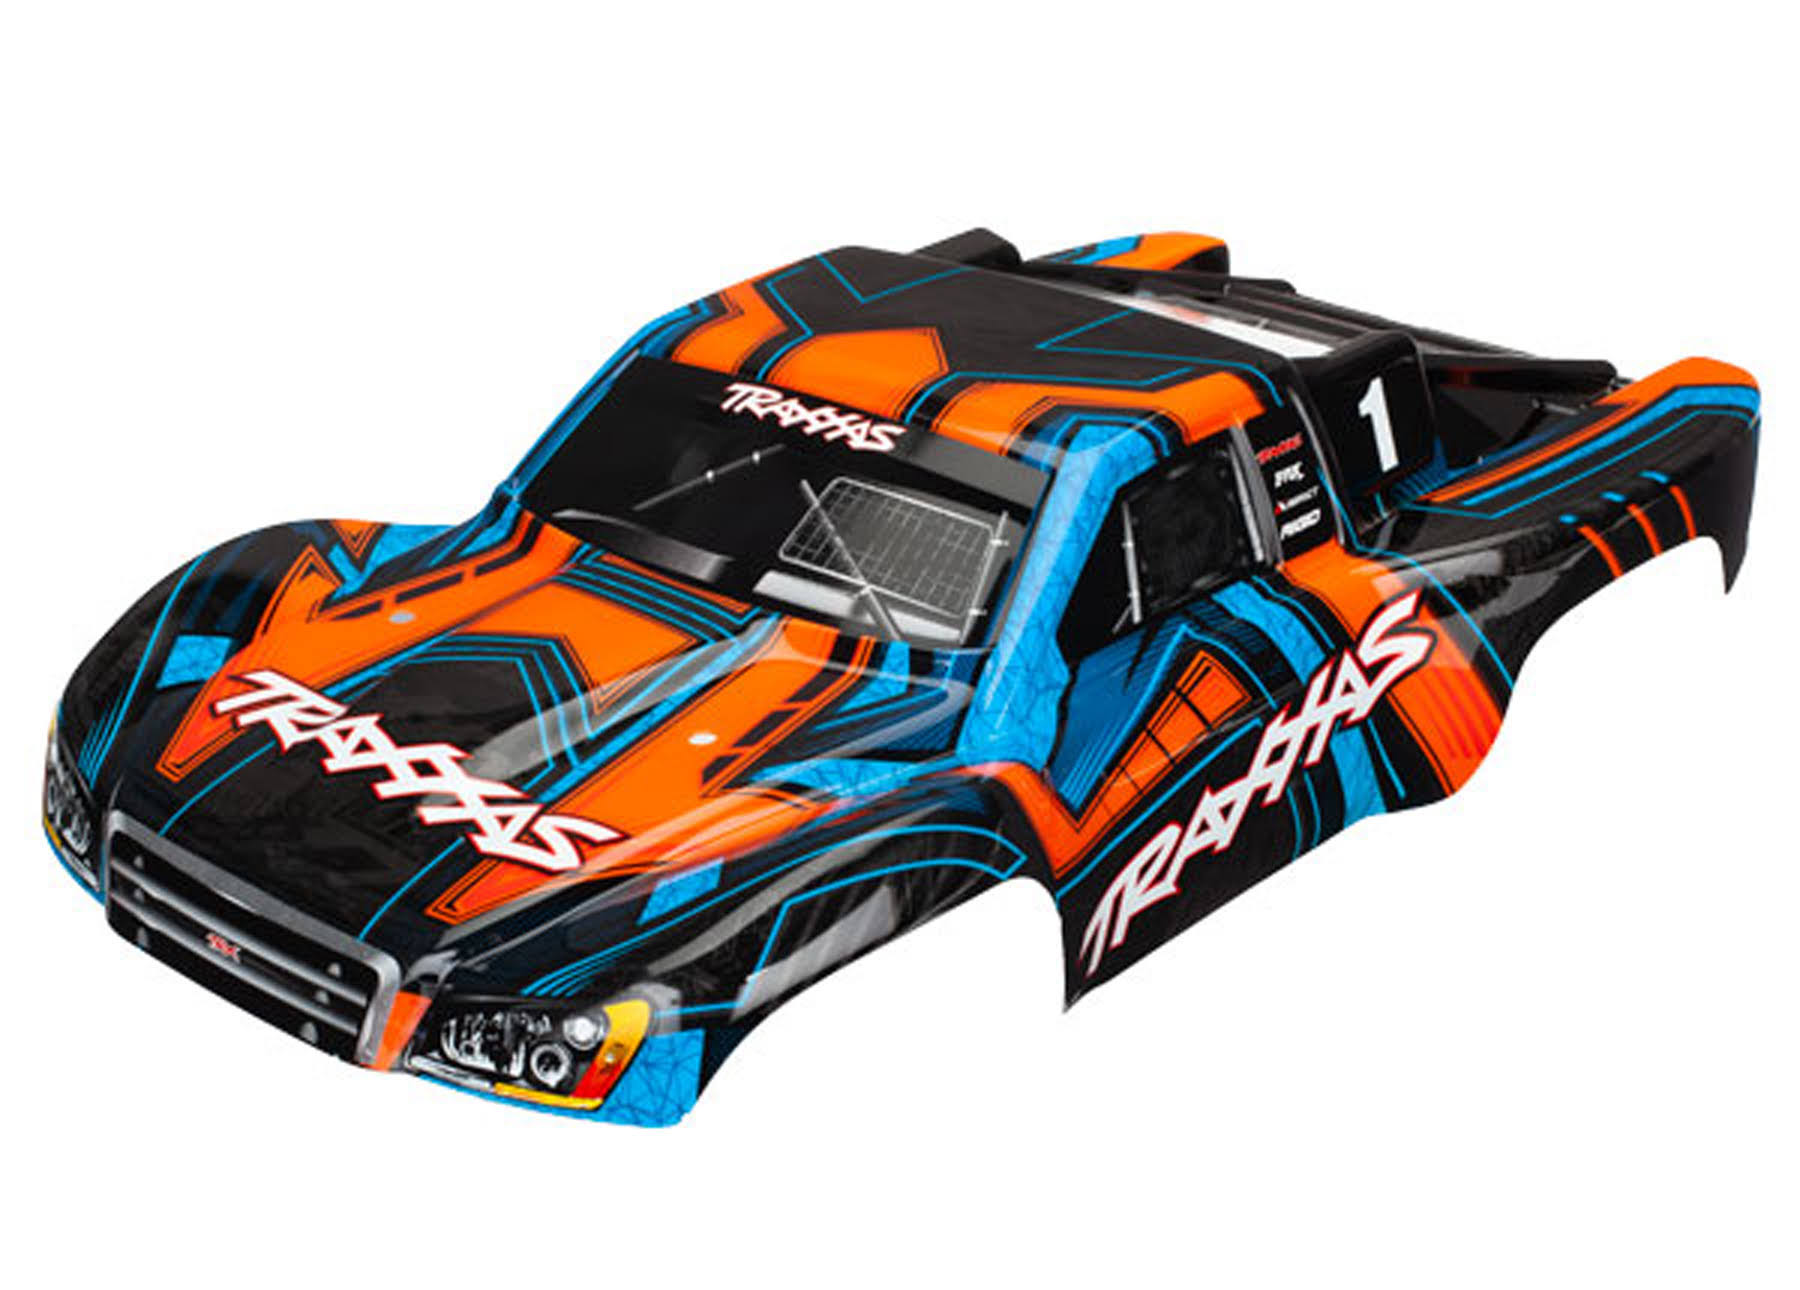 Traxxas 6844 Body Slash 4x4 Orange and Blue (Painted Decals applied)